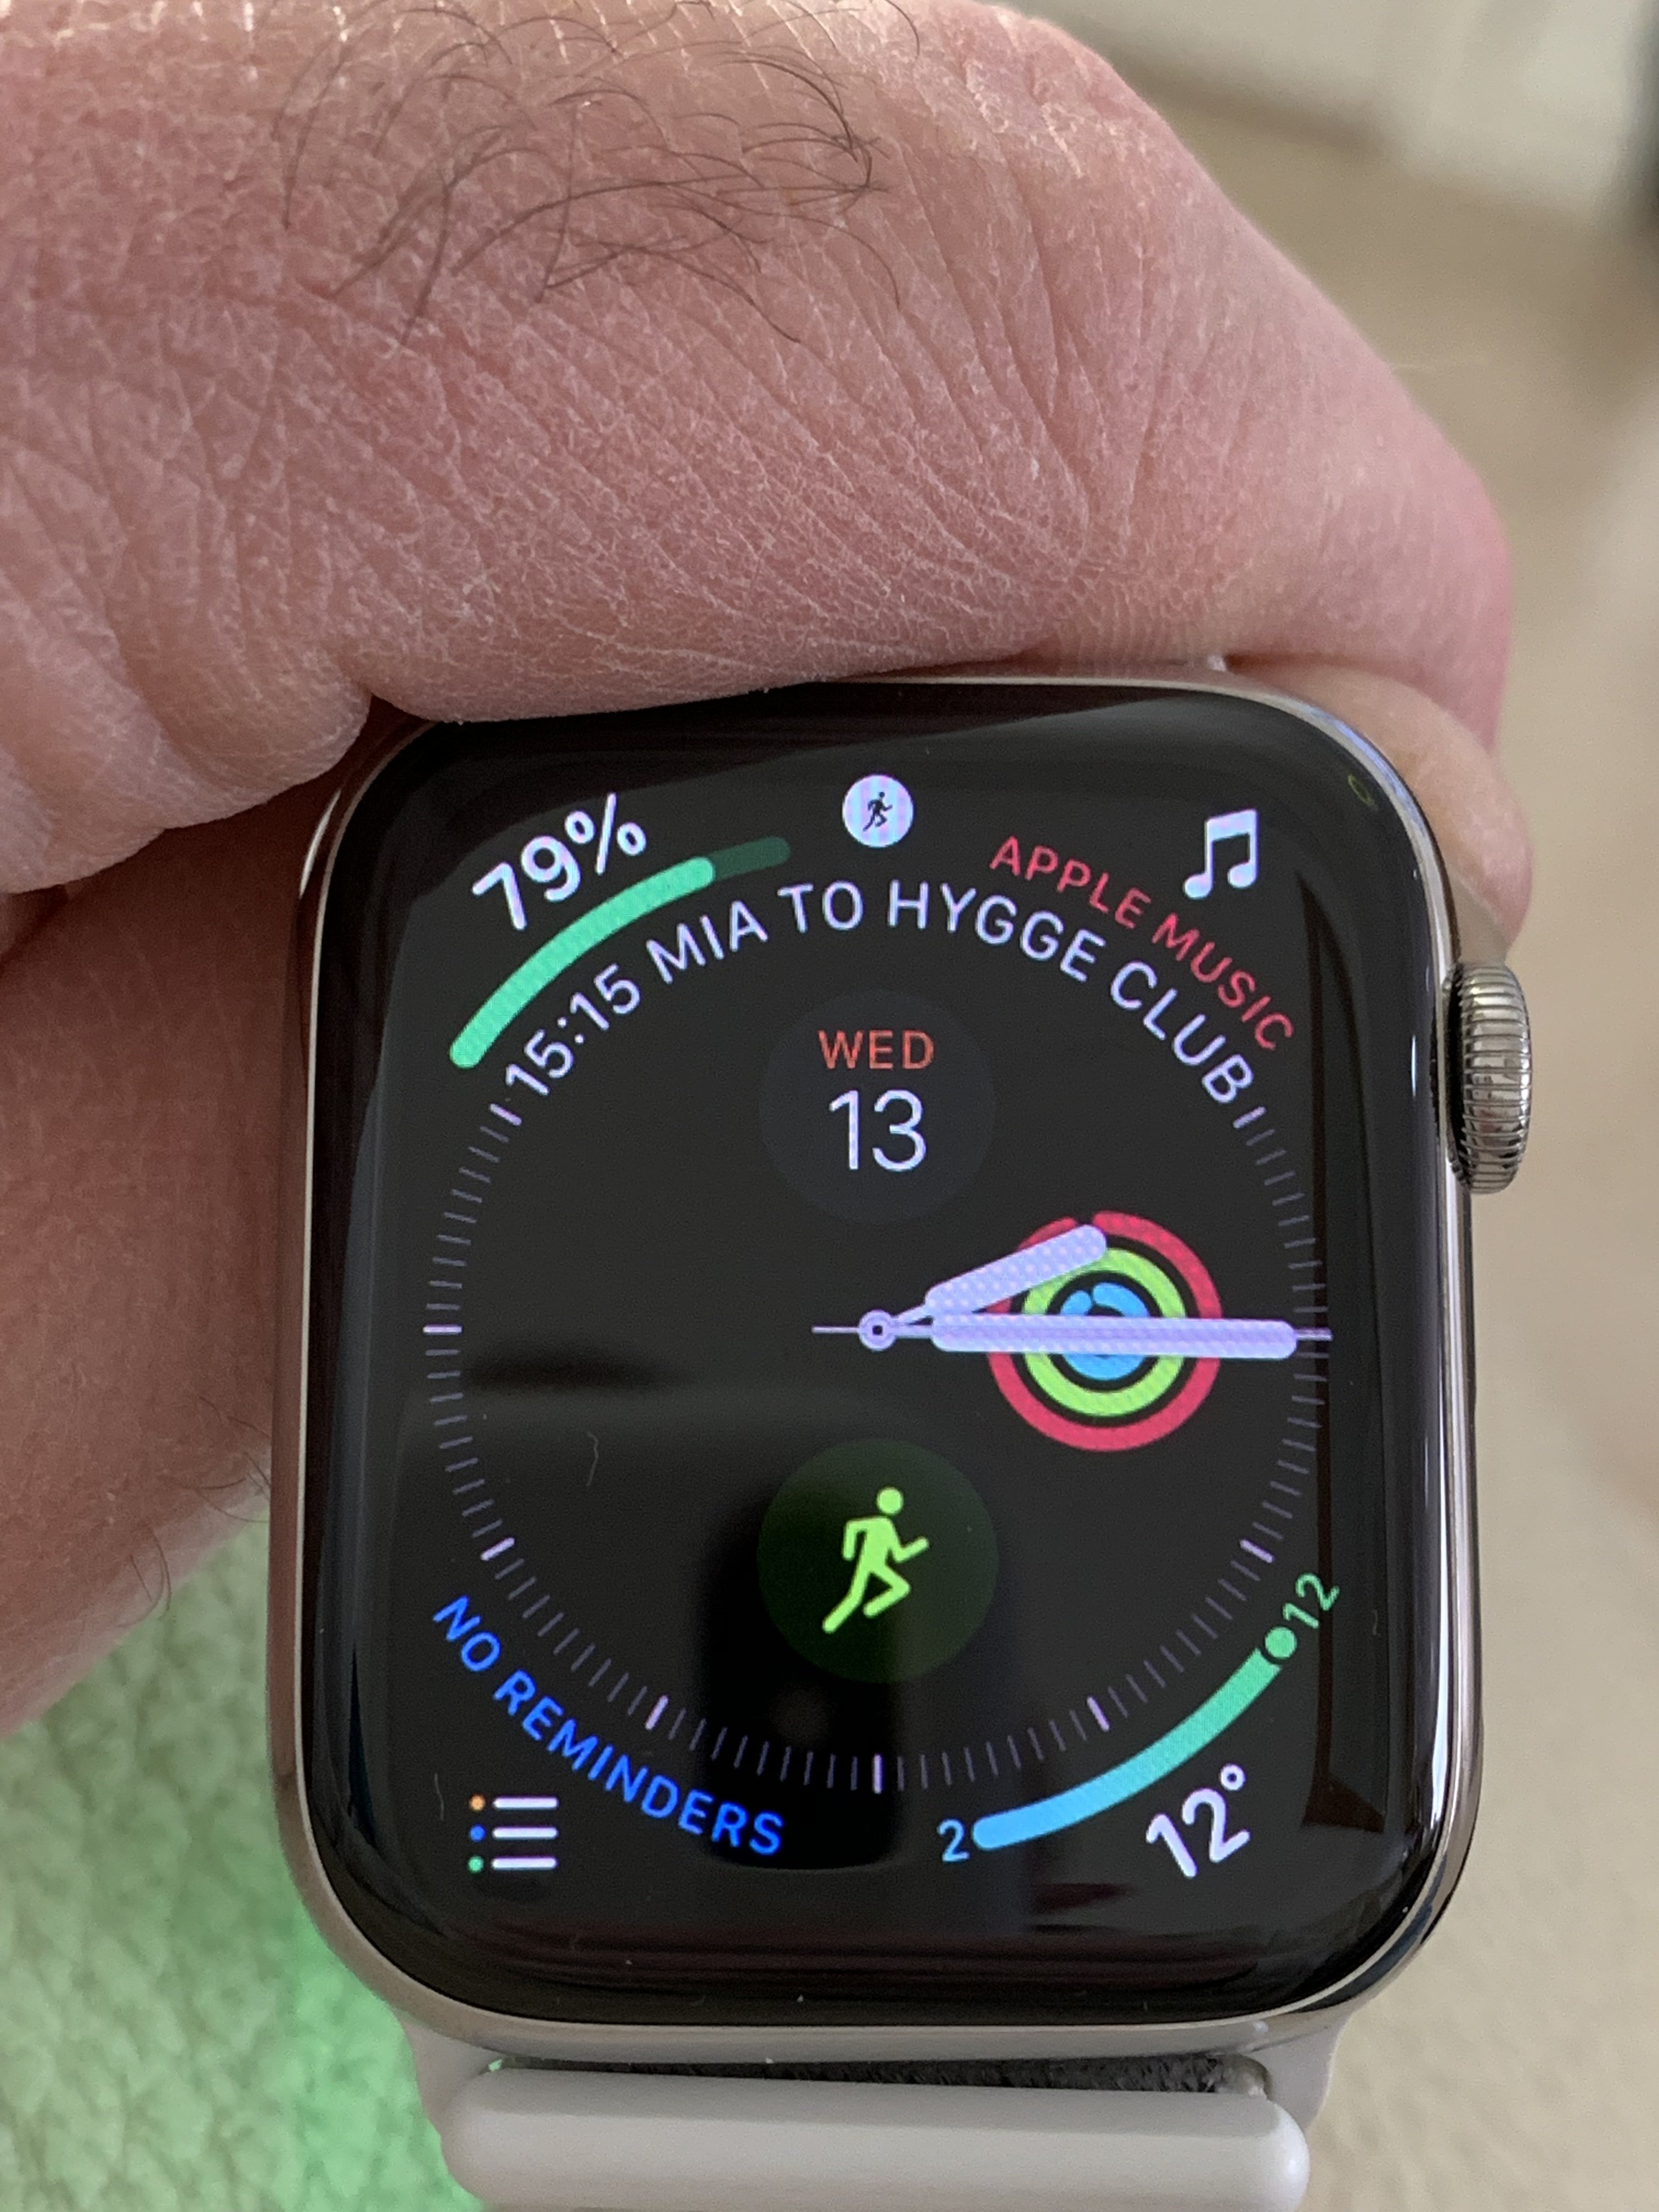 Apple Watch activity rings filling while I do nothing | MacRumors Forums